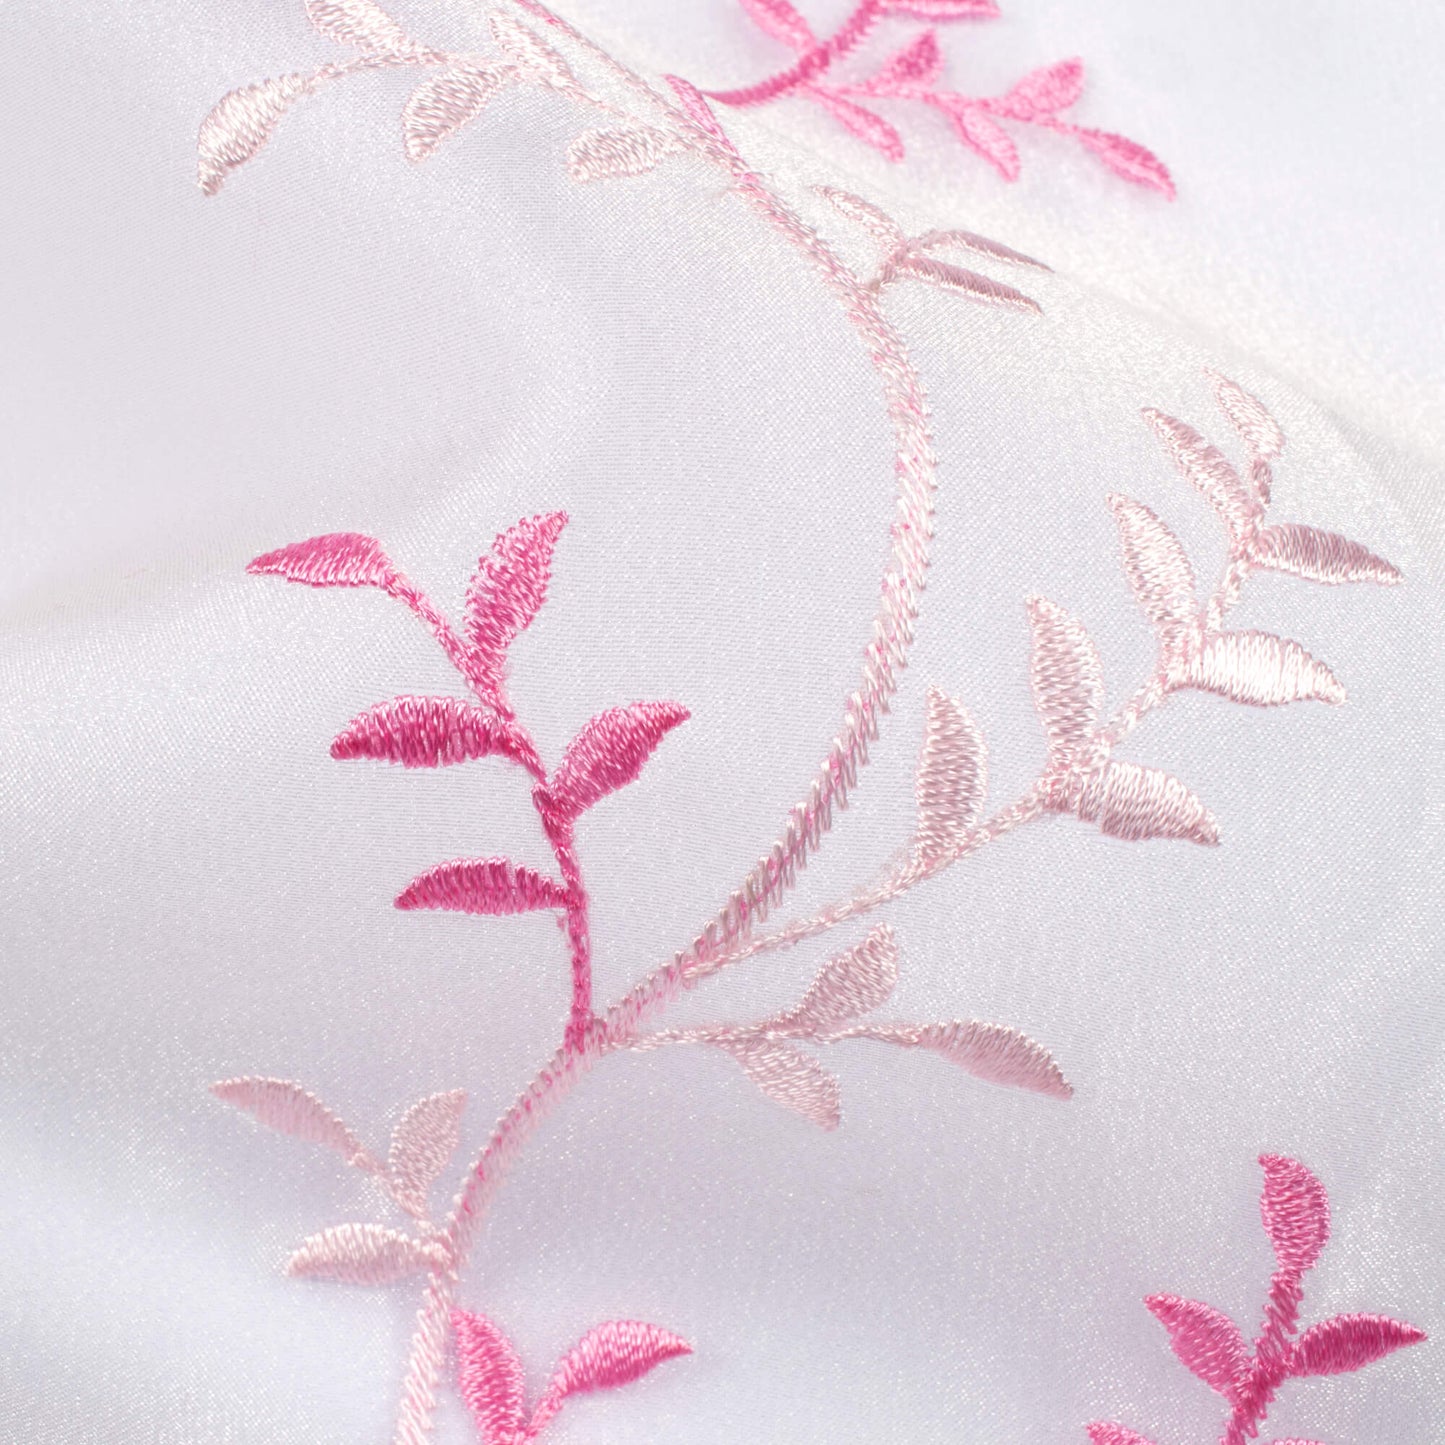 White And Taffy Pink Embroidery Organza Tissue Premium Sheer Fabric (Width 48 Inches)